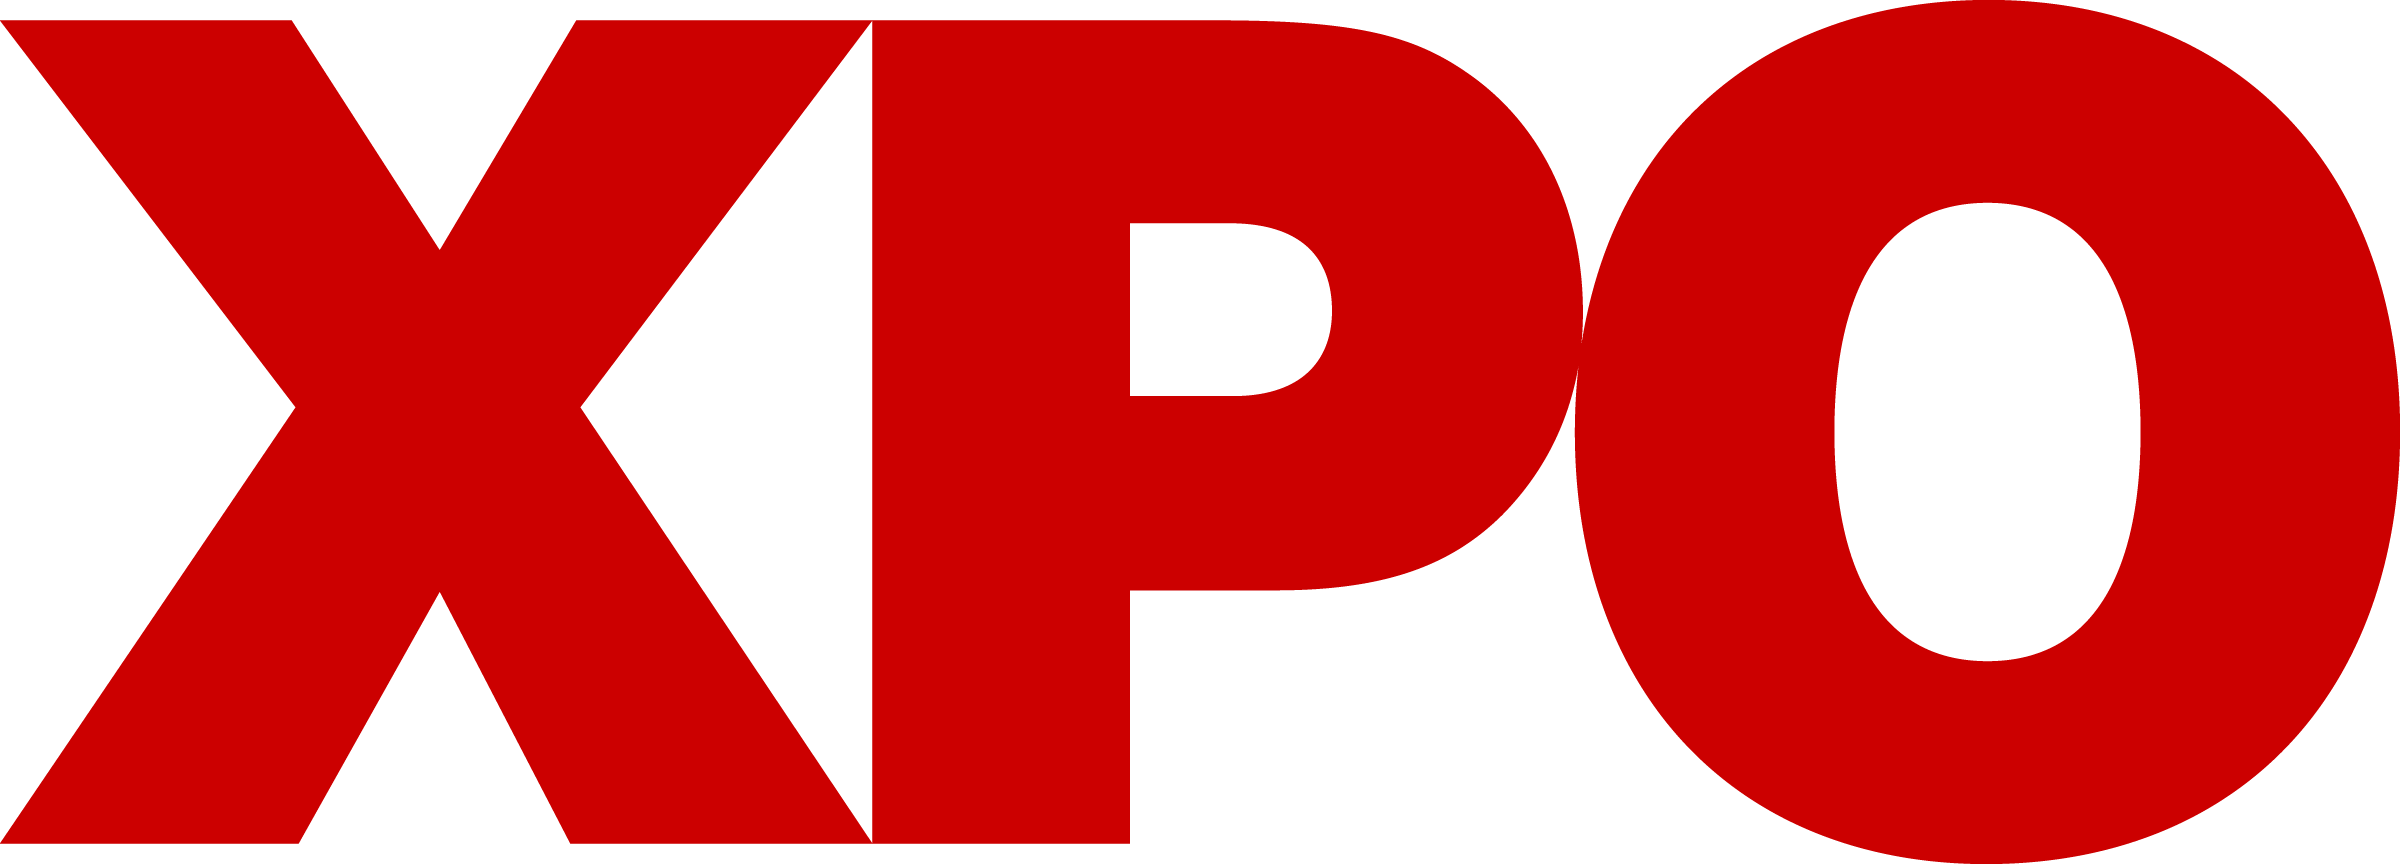 XPO Provides North American LTL Operating Data for May 2023 378aec62-5d02-4947-a49f-6b239fc7402d?size=1